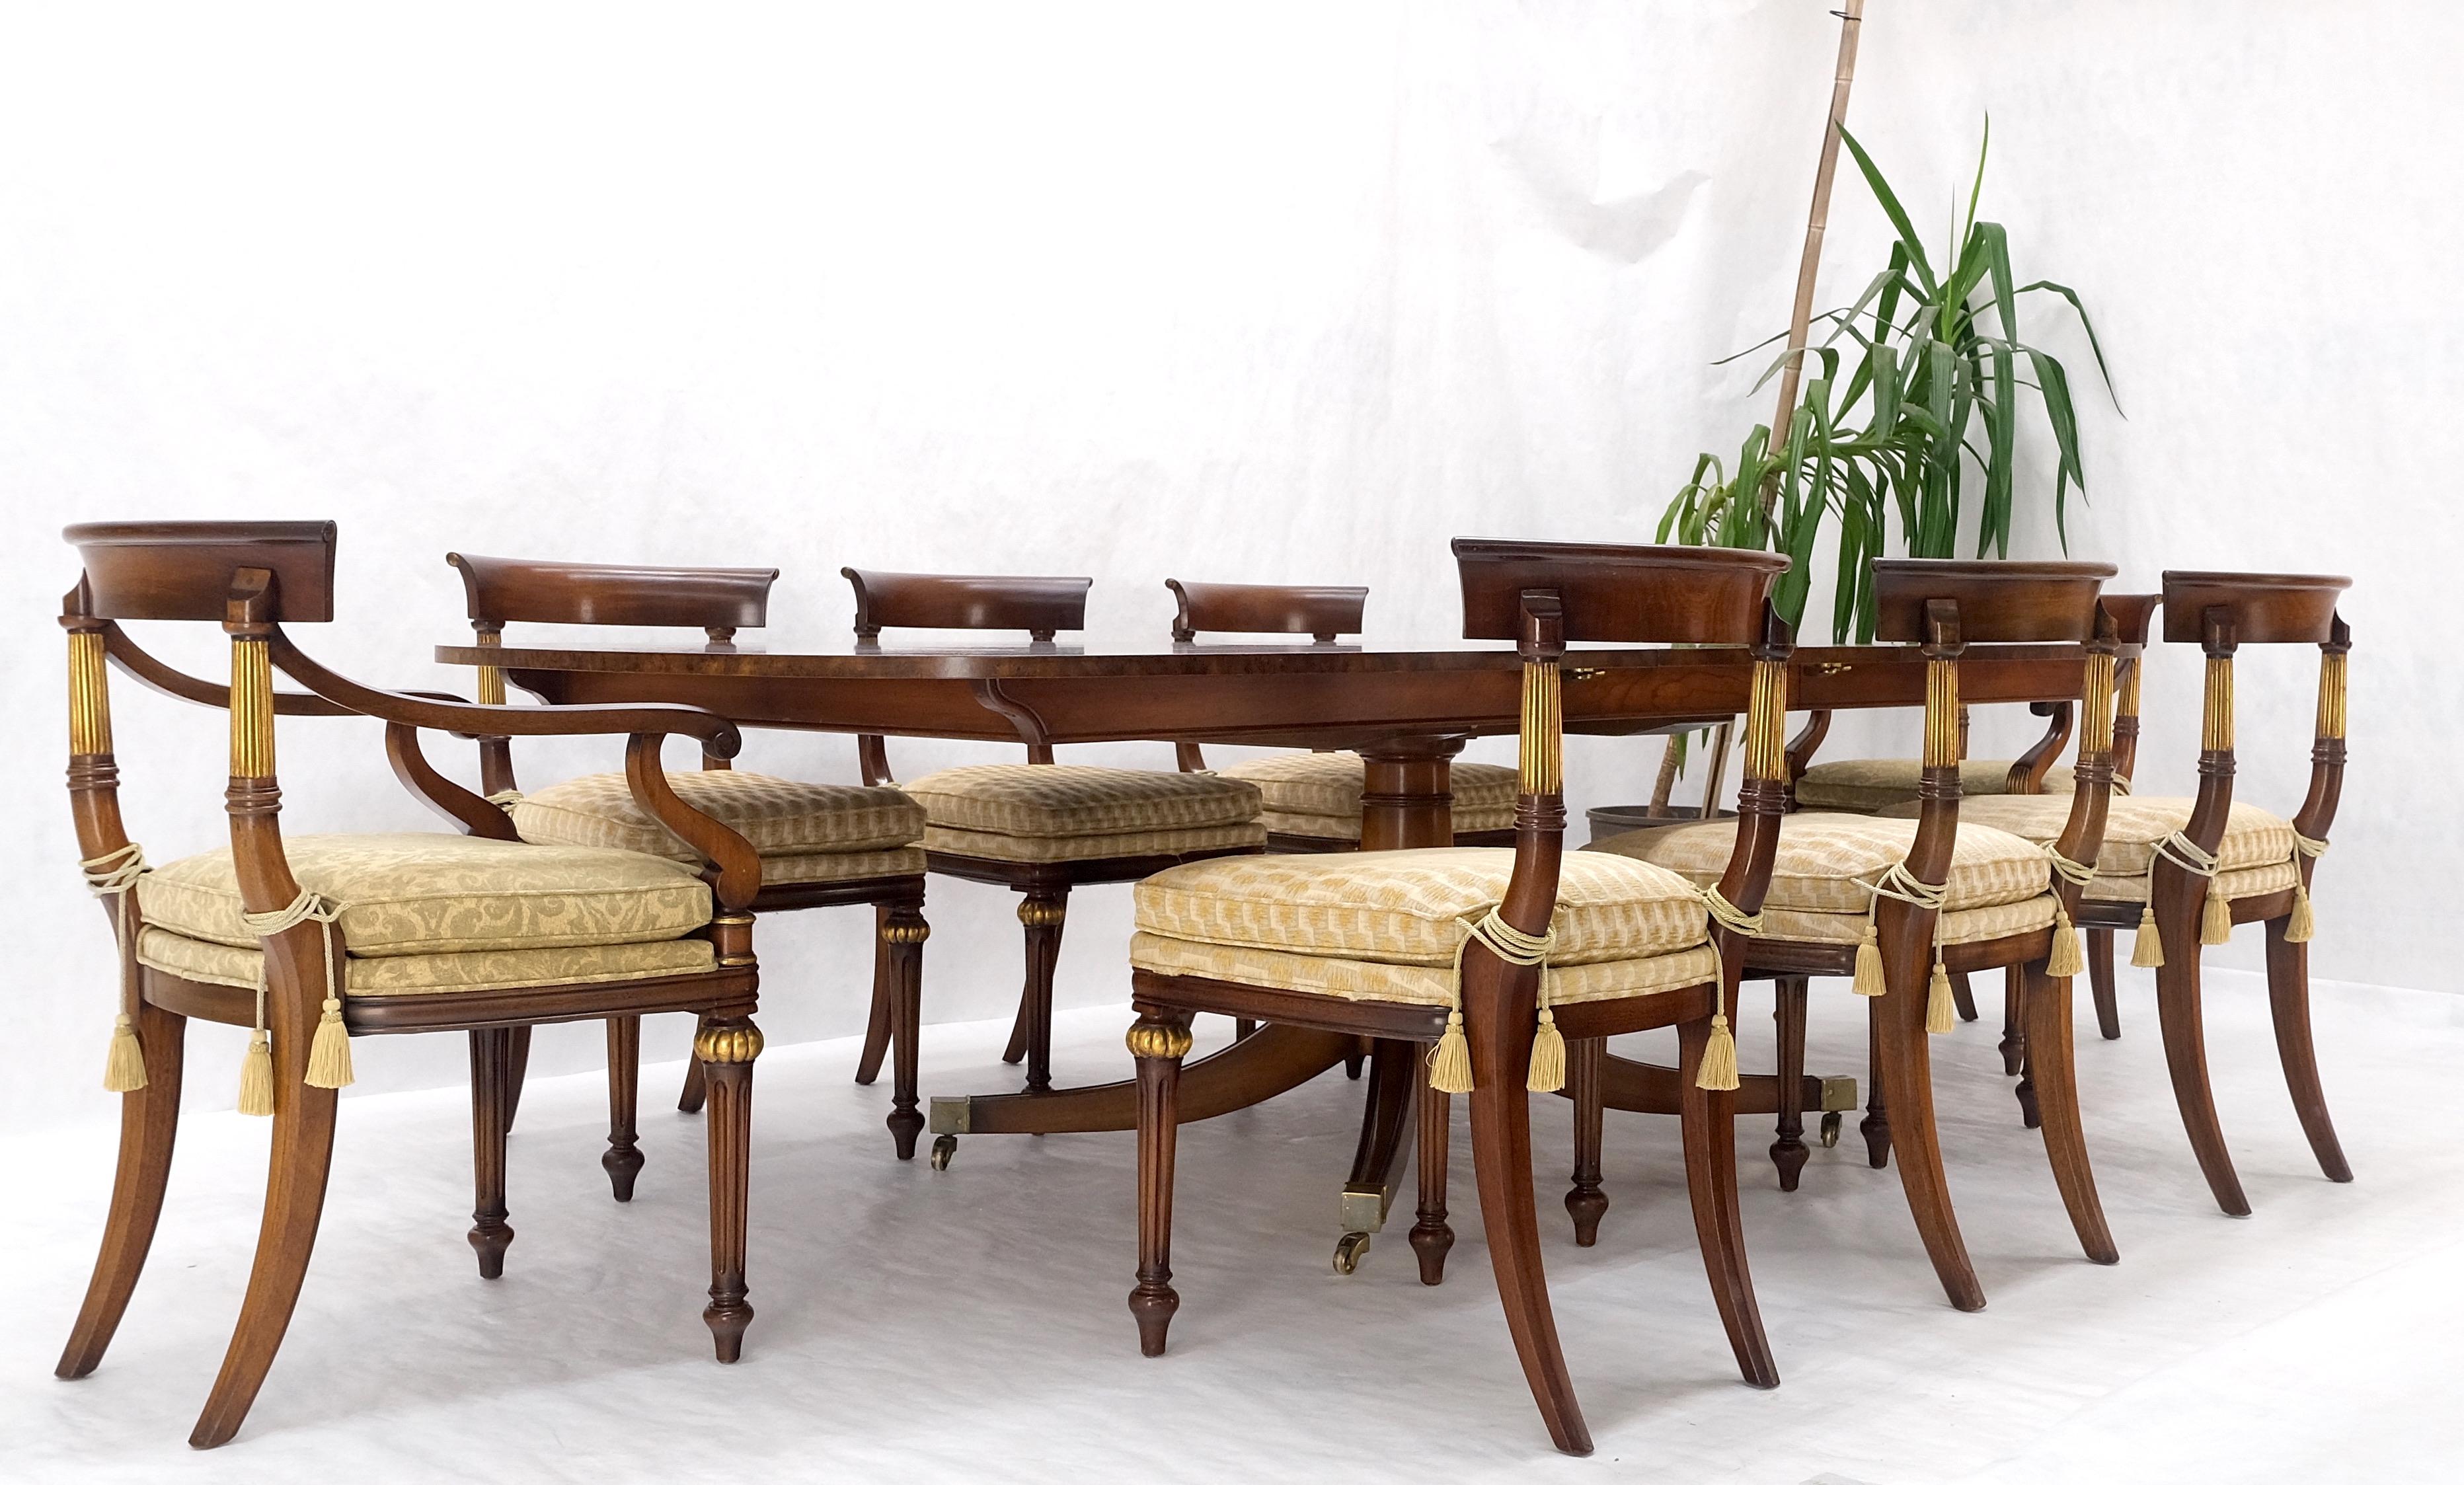 Single Pedestal One Leaf Oval Banded Dining Table 8 Regency Chairs Set MINT! For Sale 9